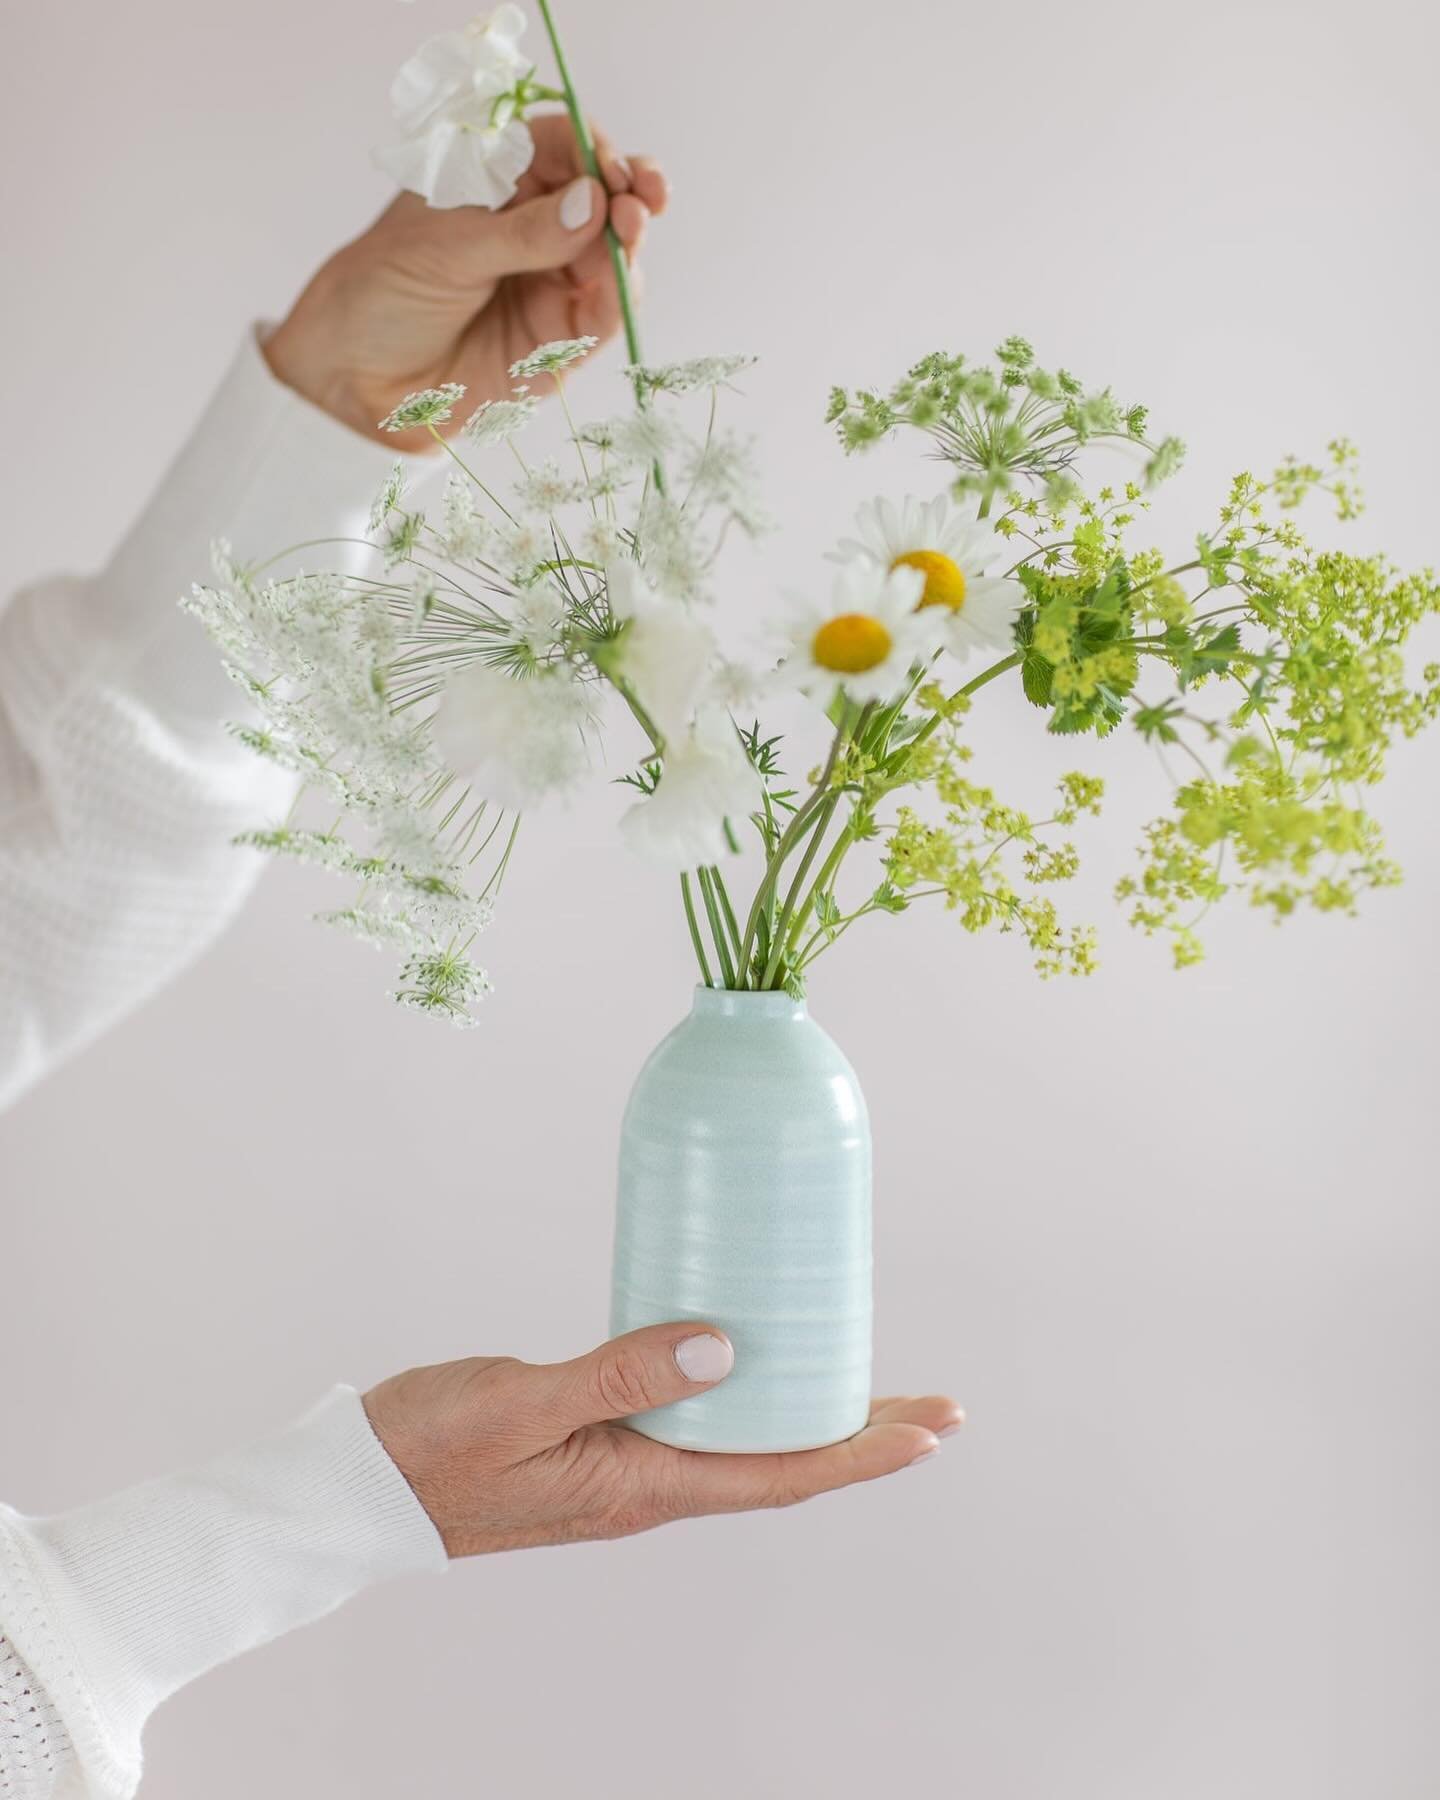 Here&rsquo;s some frothy flowers for the weekend. (Adore this fresh combination of white and zingy greens). 

I love just how many flowers you can fit in these porcelain milk bottles and can see why they continue to be one of my best-selling items.

